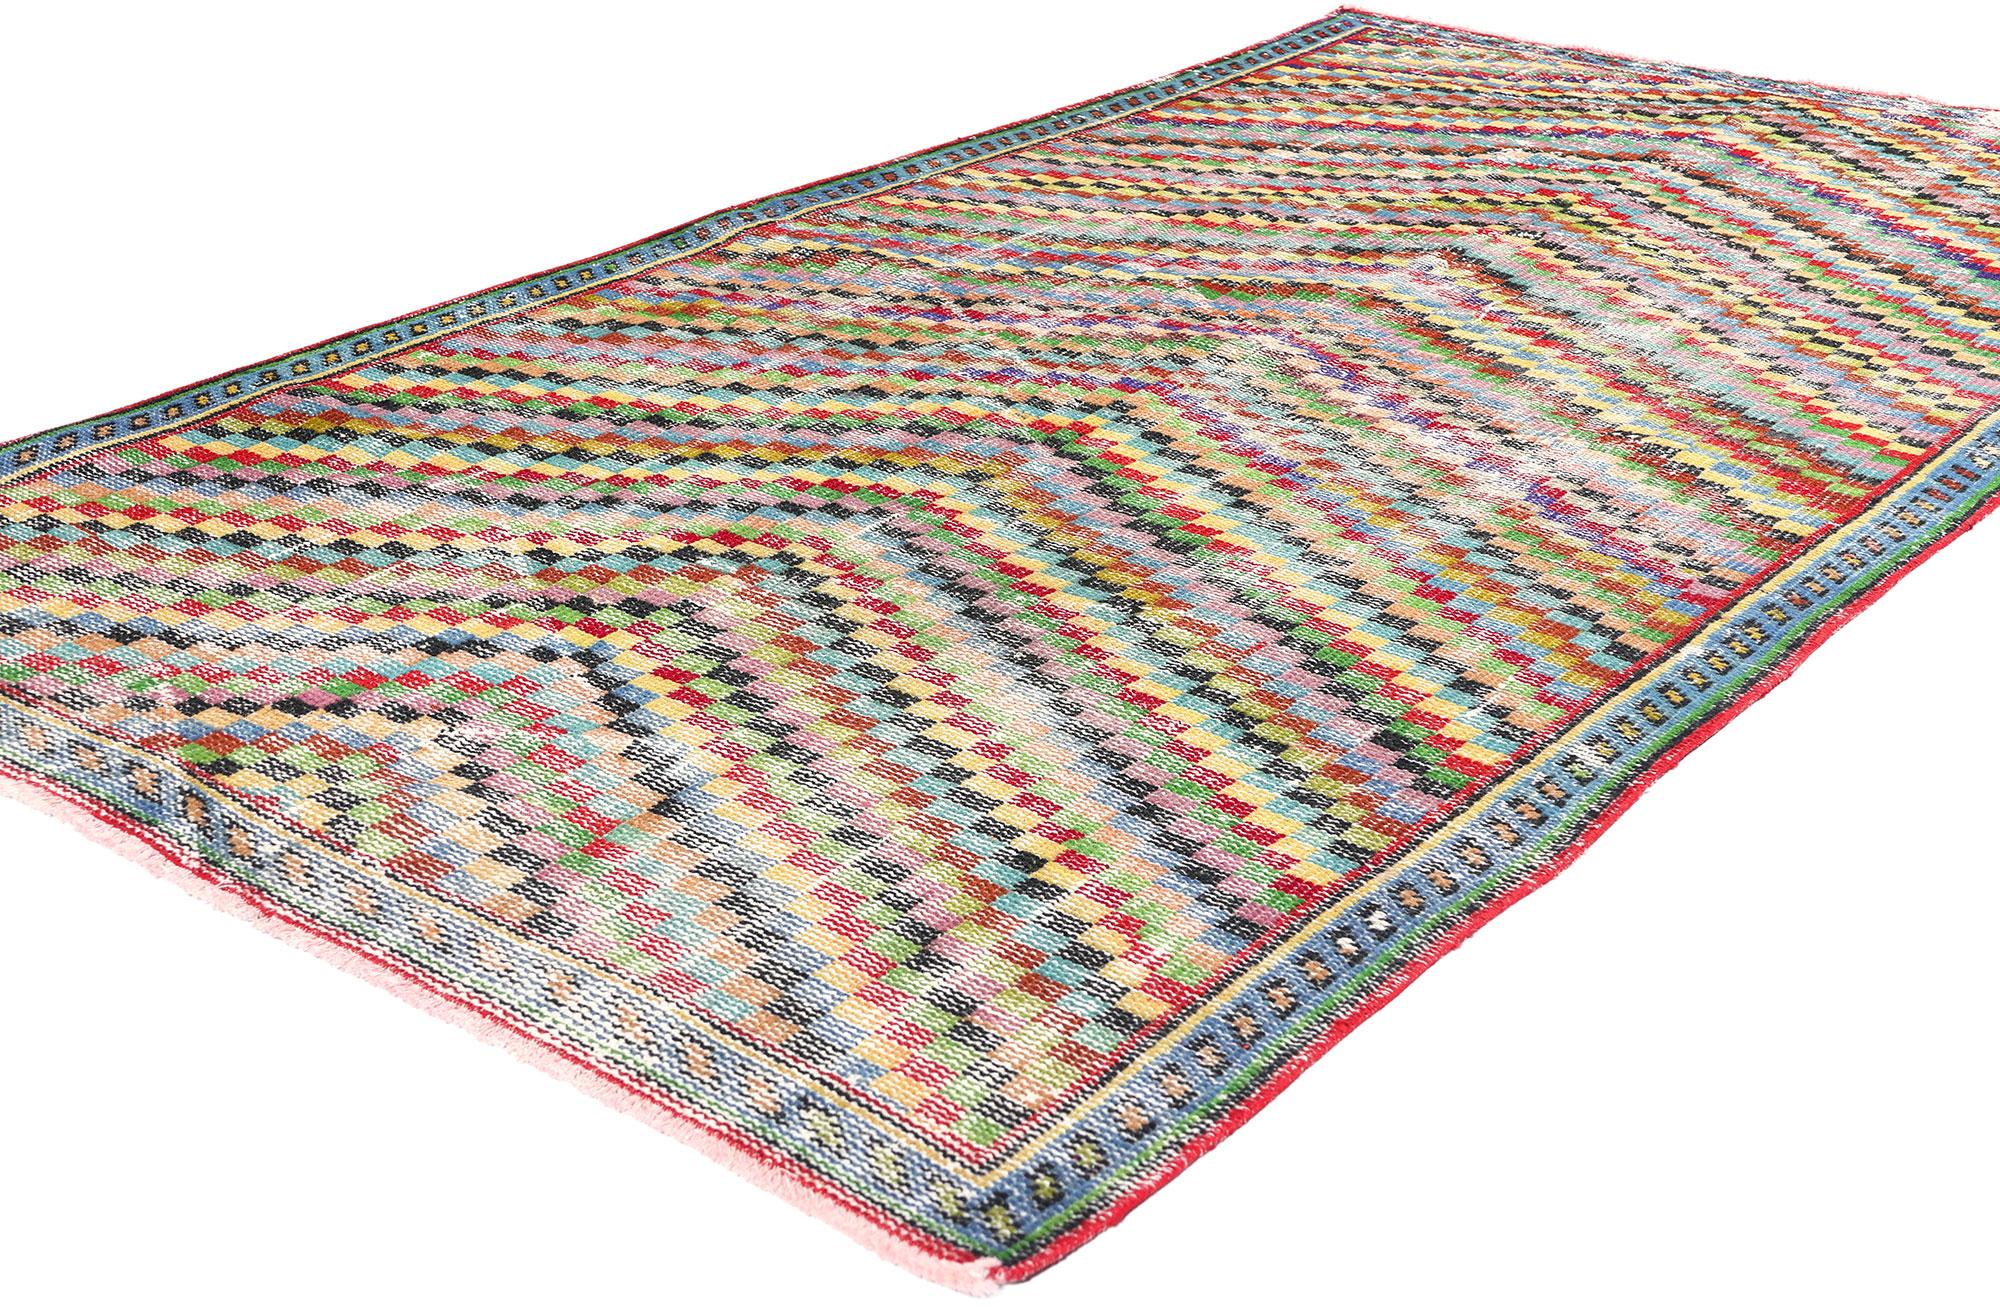 53301 Zeki Muren Distressed Vintage Turkish Sivas Rug, 04'01 x 07'05. Nestled within the serene landscapes of Turkey's Sivas region, Zeki Muren Turkish Sivas rugs honor the legacy of the esteemed Turkish singer who continues to inspire. Celebrated